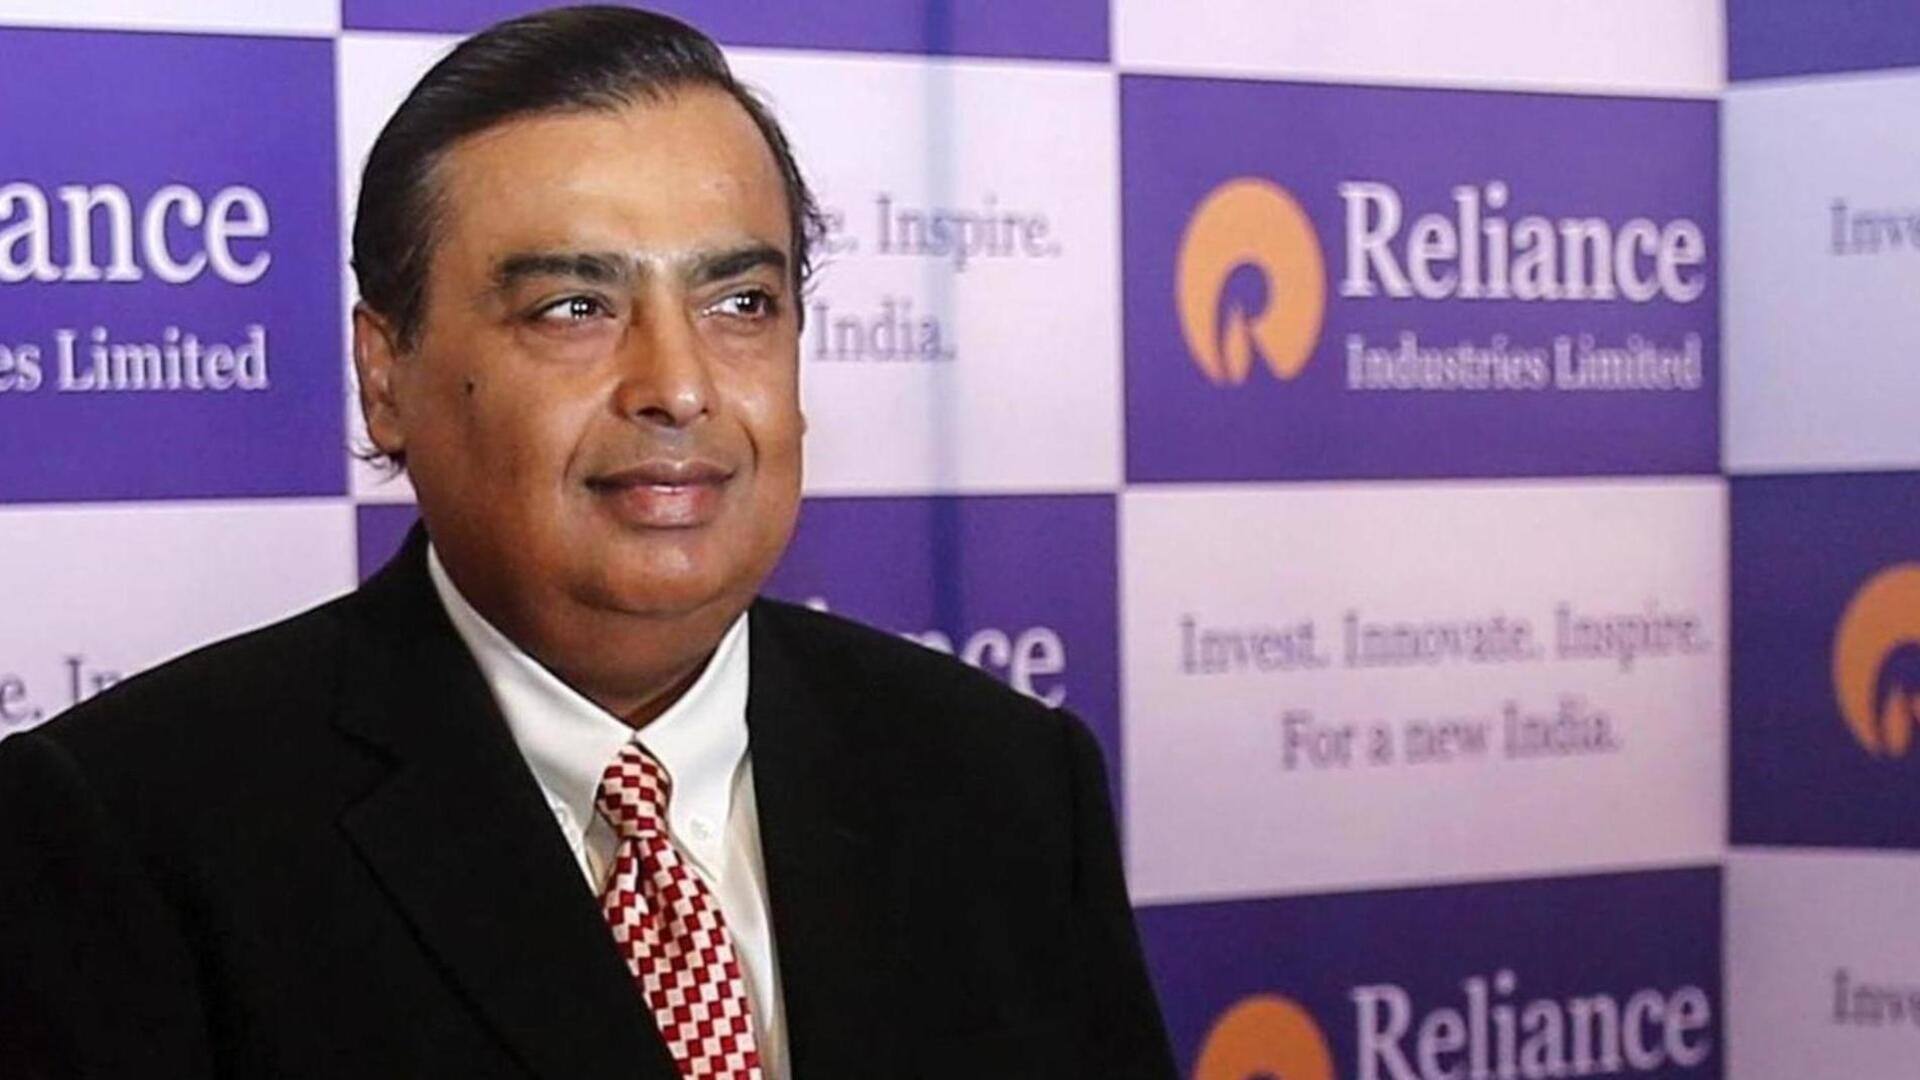 Reliance Retail is worth $112bn; twice as RIL's O2C business